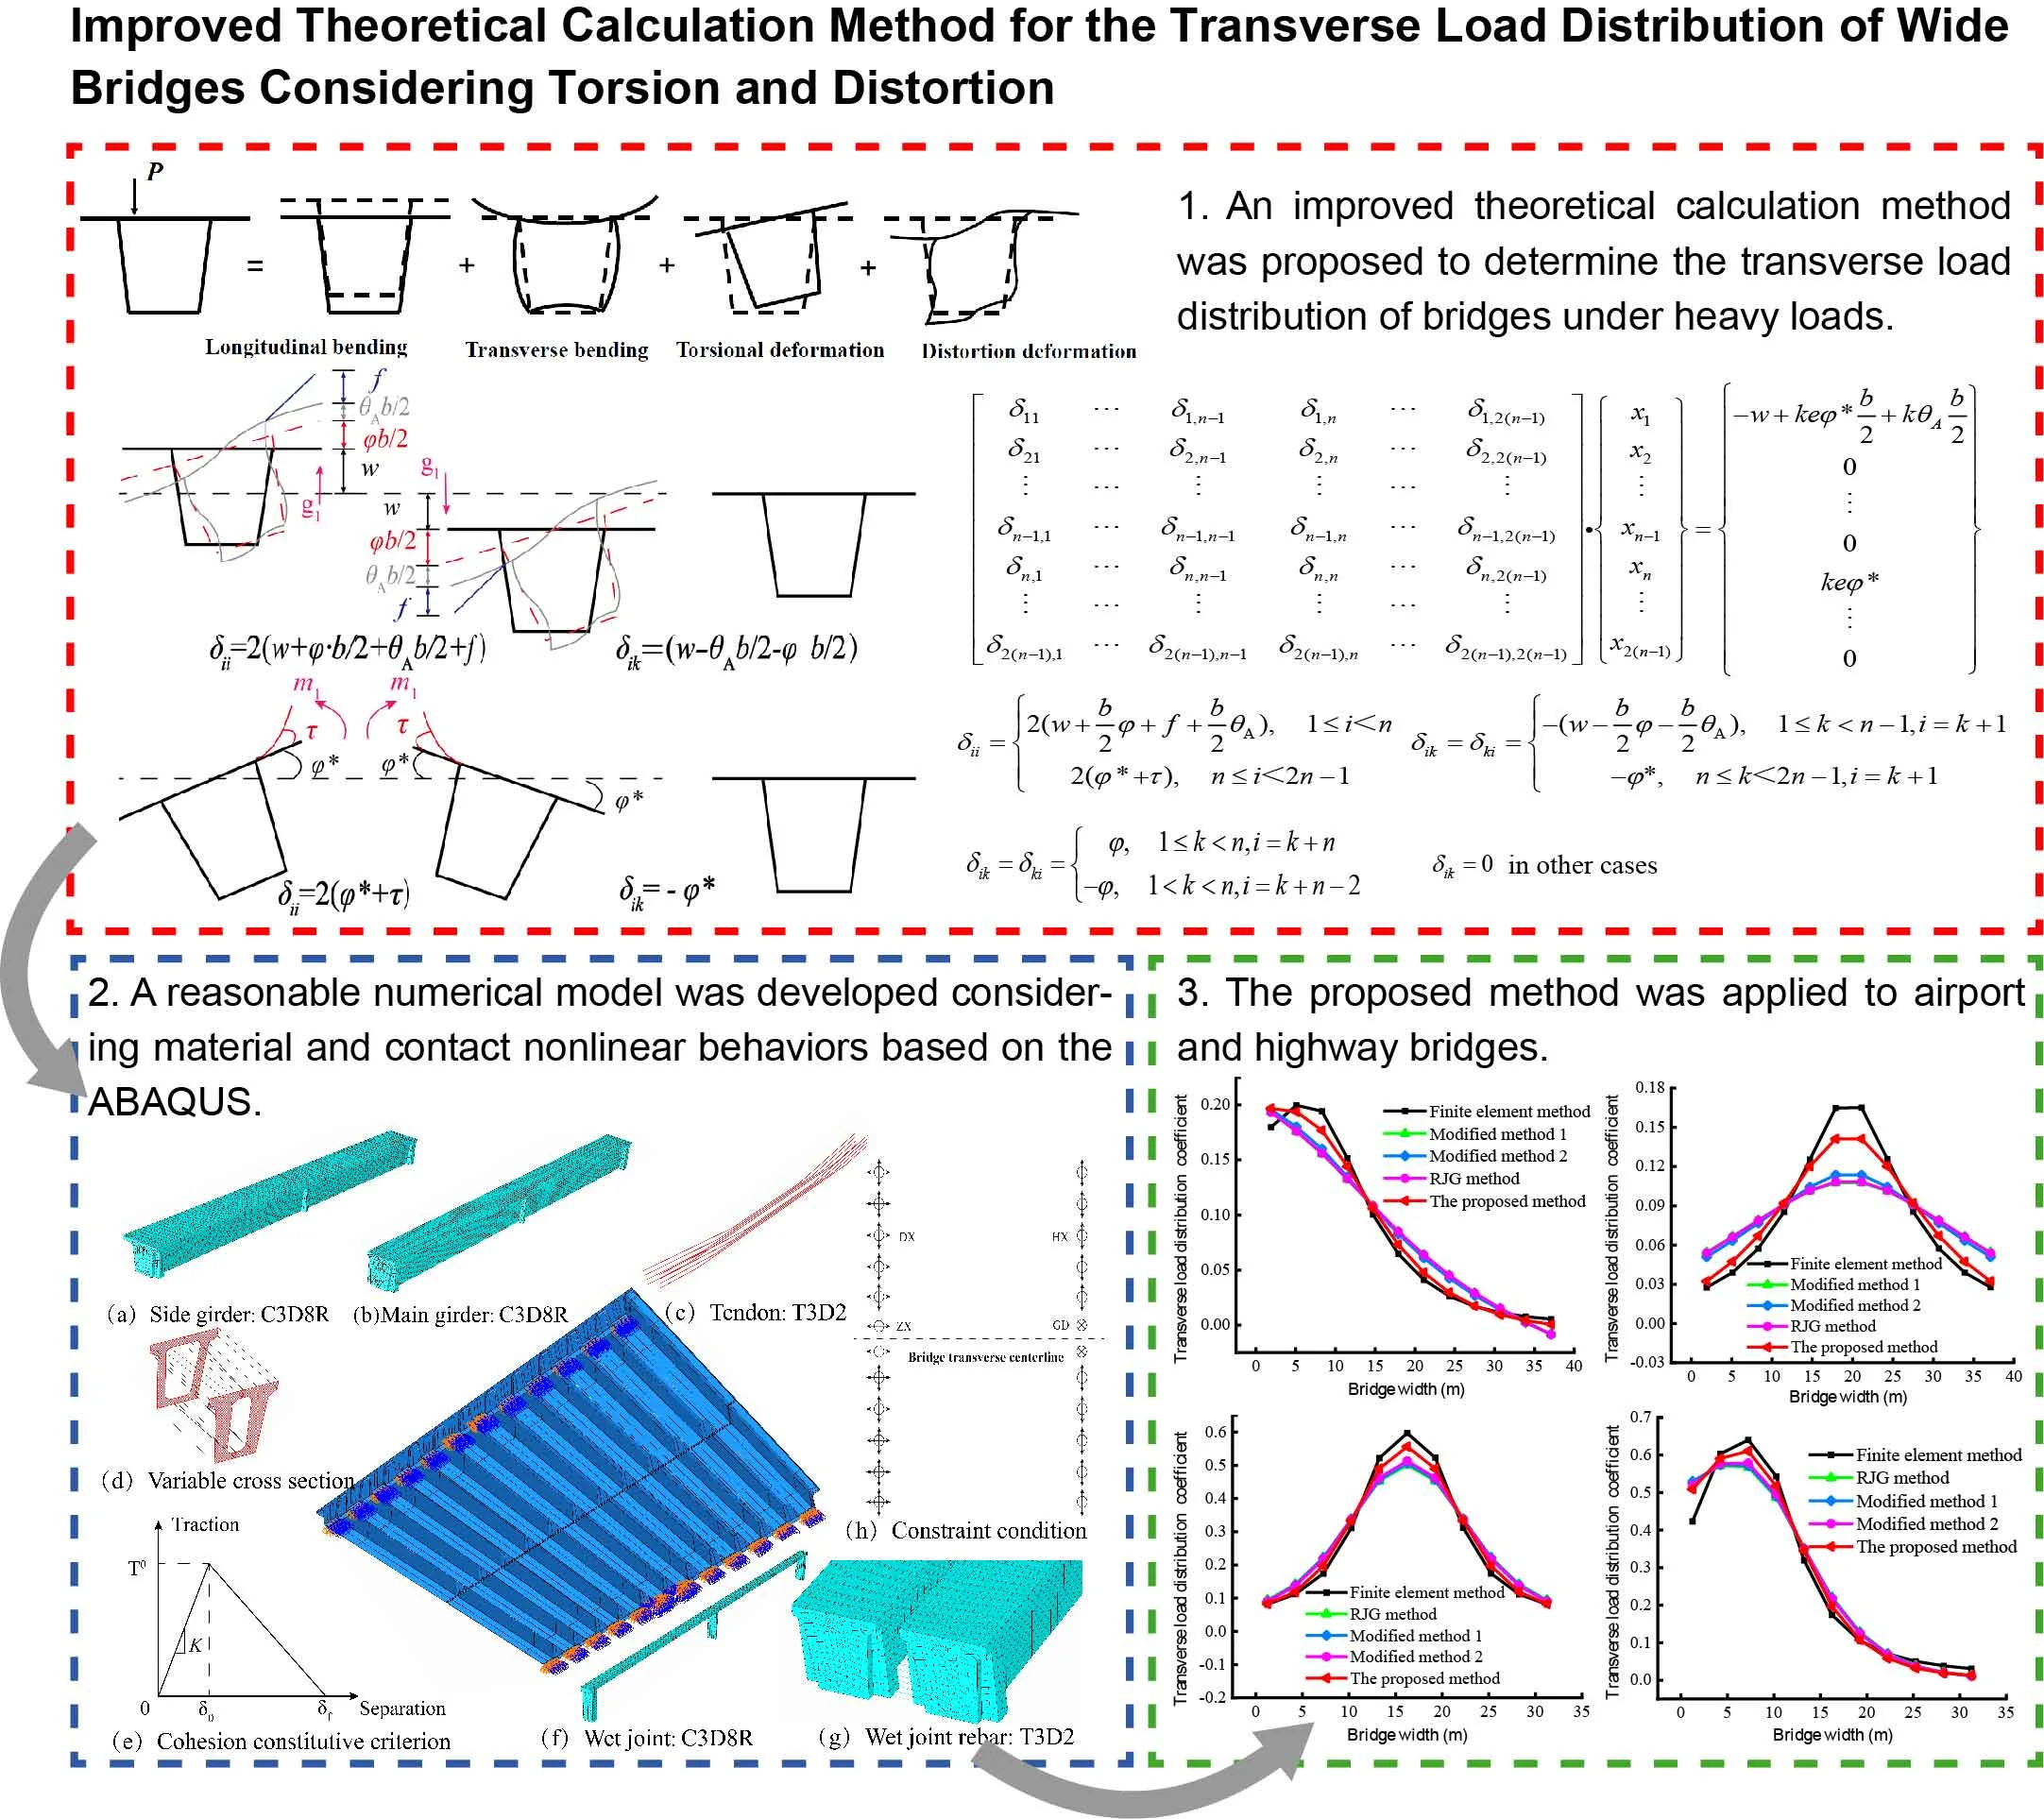 Improved theoretical calculation method for the transverse load distribution of wide bridges considering torsion and distortion